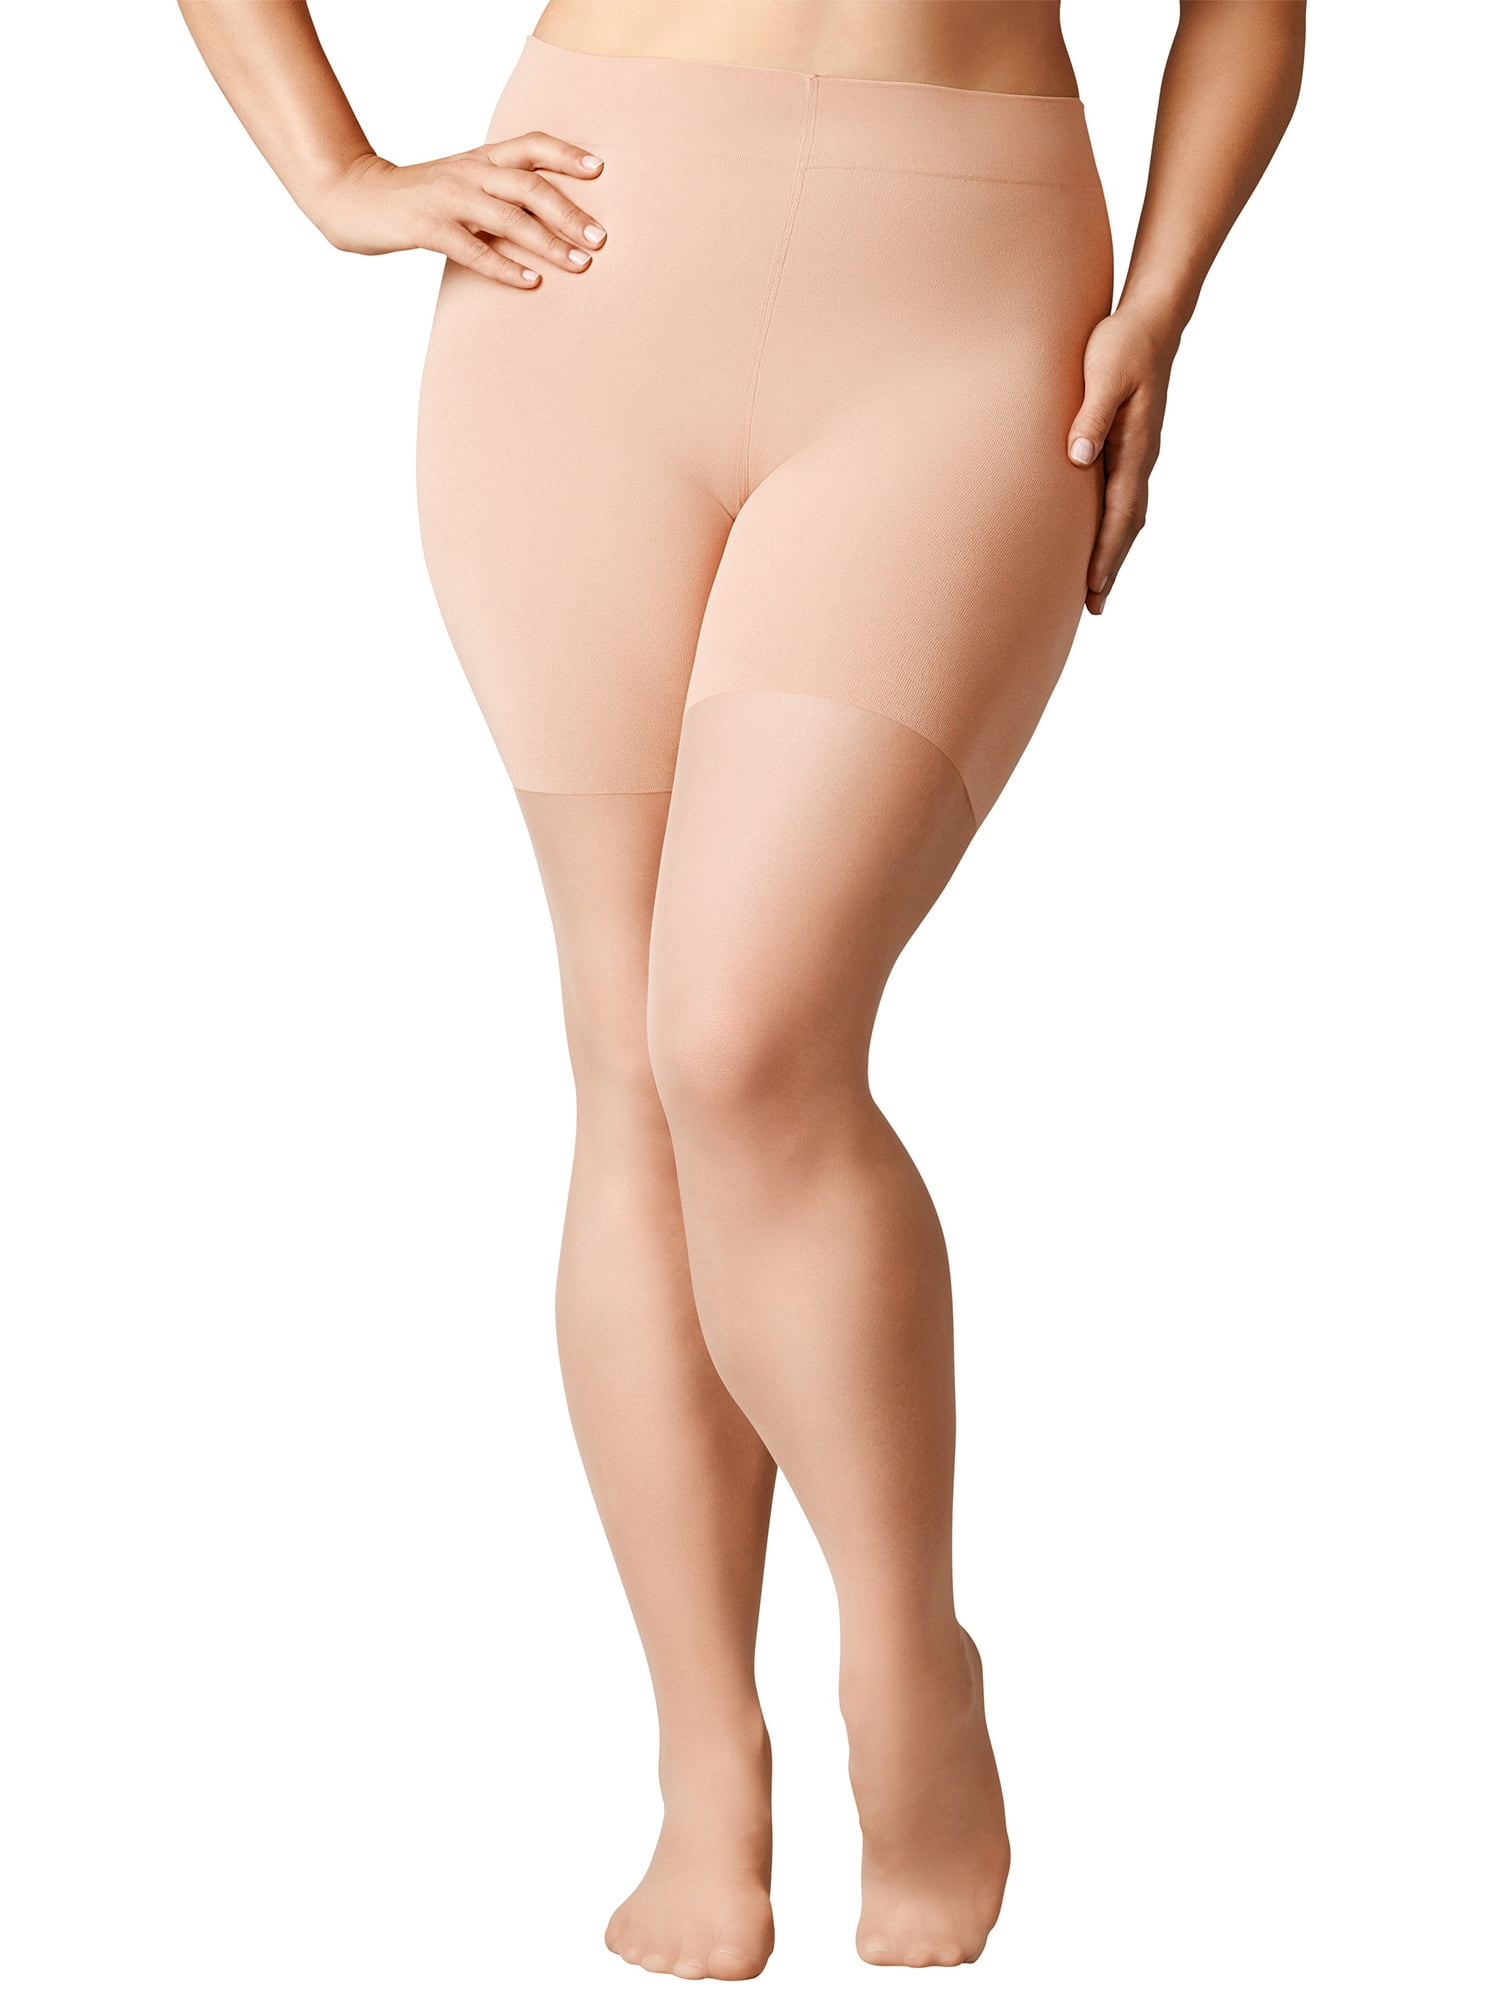 Sheer Spandex Pantyhose for Women Plus Size Pack of 3 by Lissele 